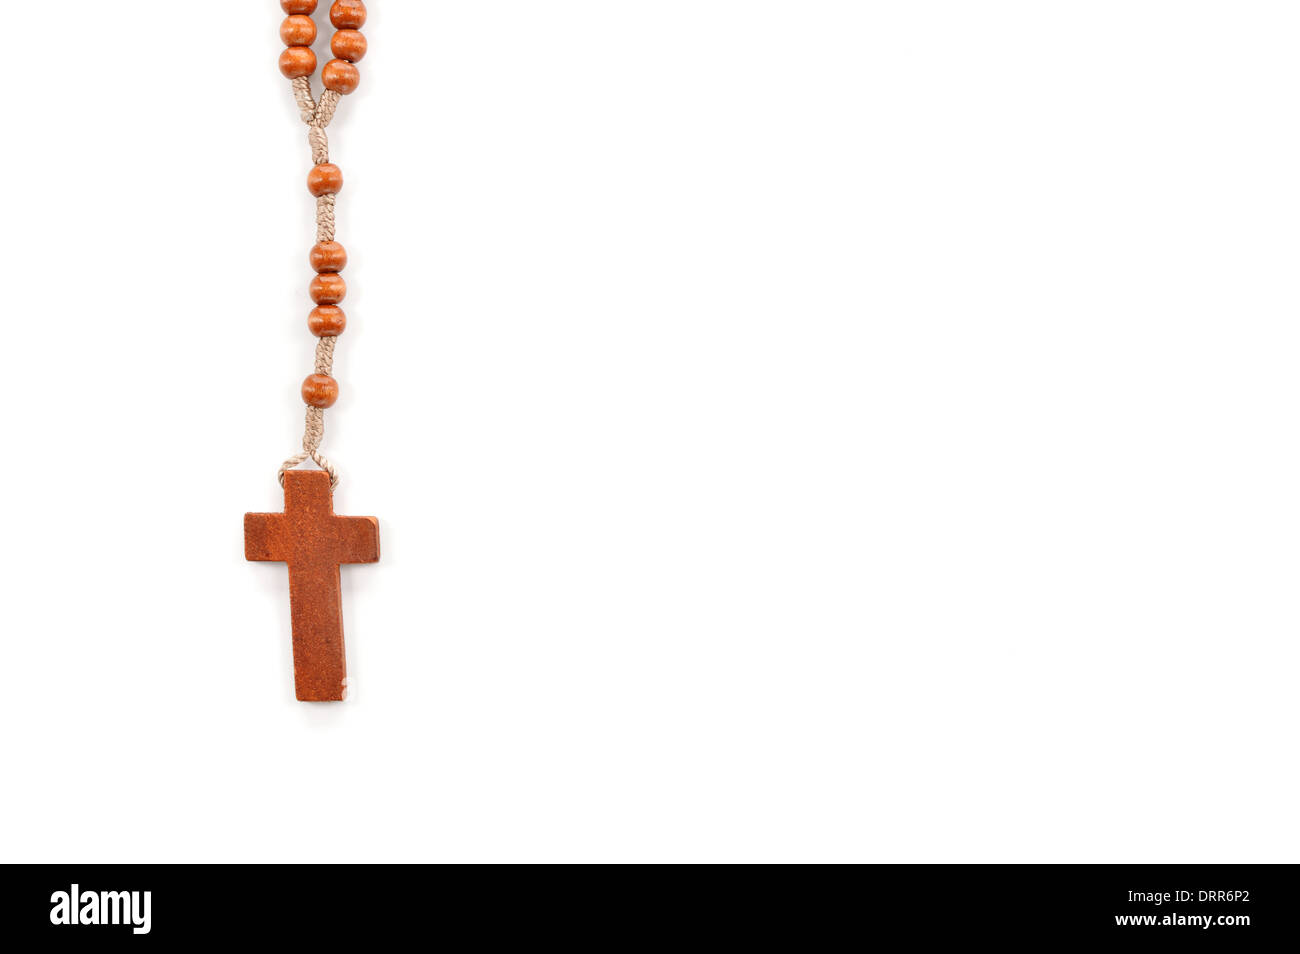 Wooden plain rosary on white background. Prayer beads use to count the repetitions of prayers - rosary of Virgin Mary. Stock Photo